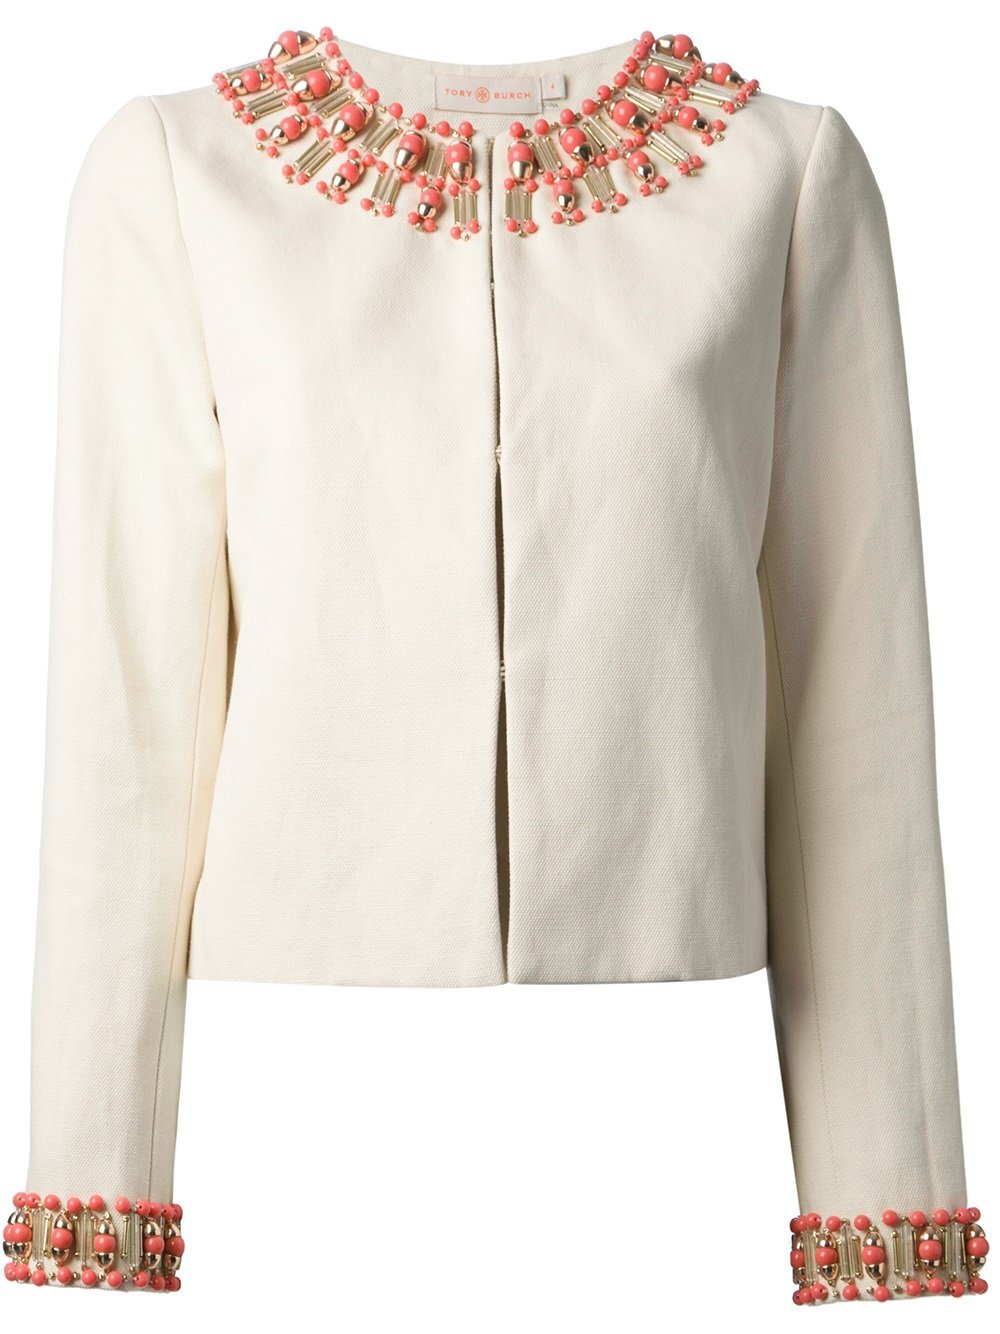 tory-burch-beige-isabella-jacket-product-1-19462561-0-600137029-normal.jpeg